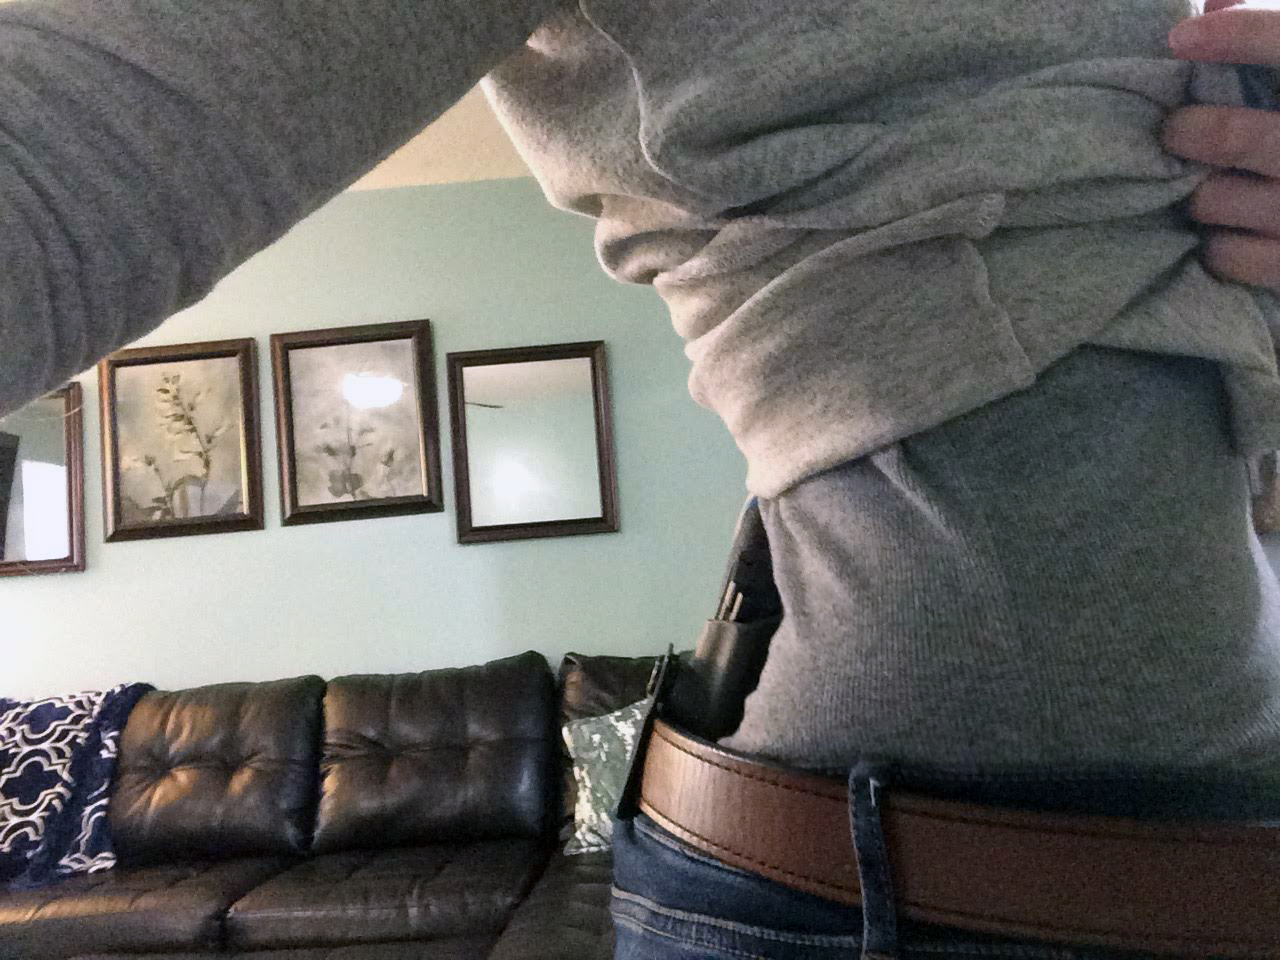 Shield Hyve +2 Mag Extensions, dara holsters, shield holster, shield iwb holster, inside the waistband for the shield, smith and wesson shield holster